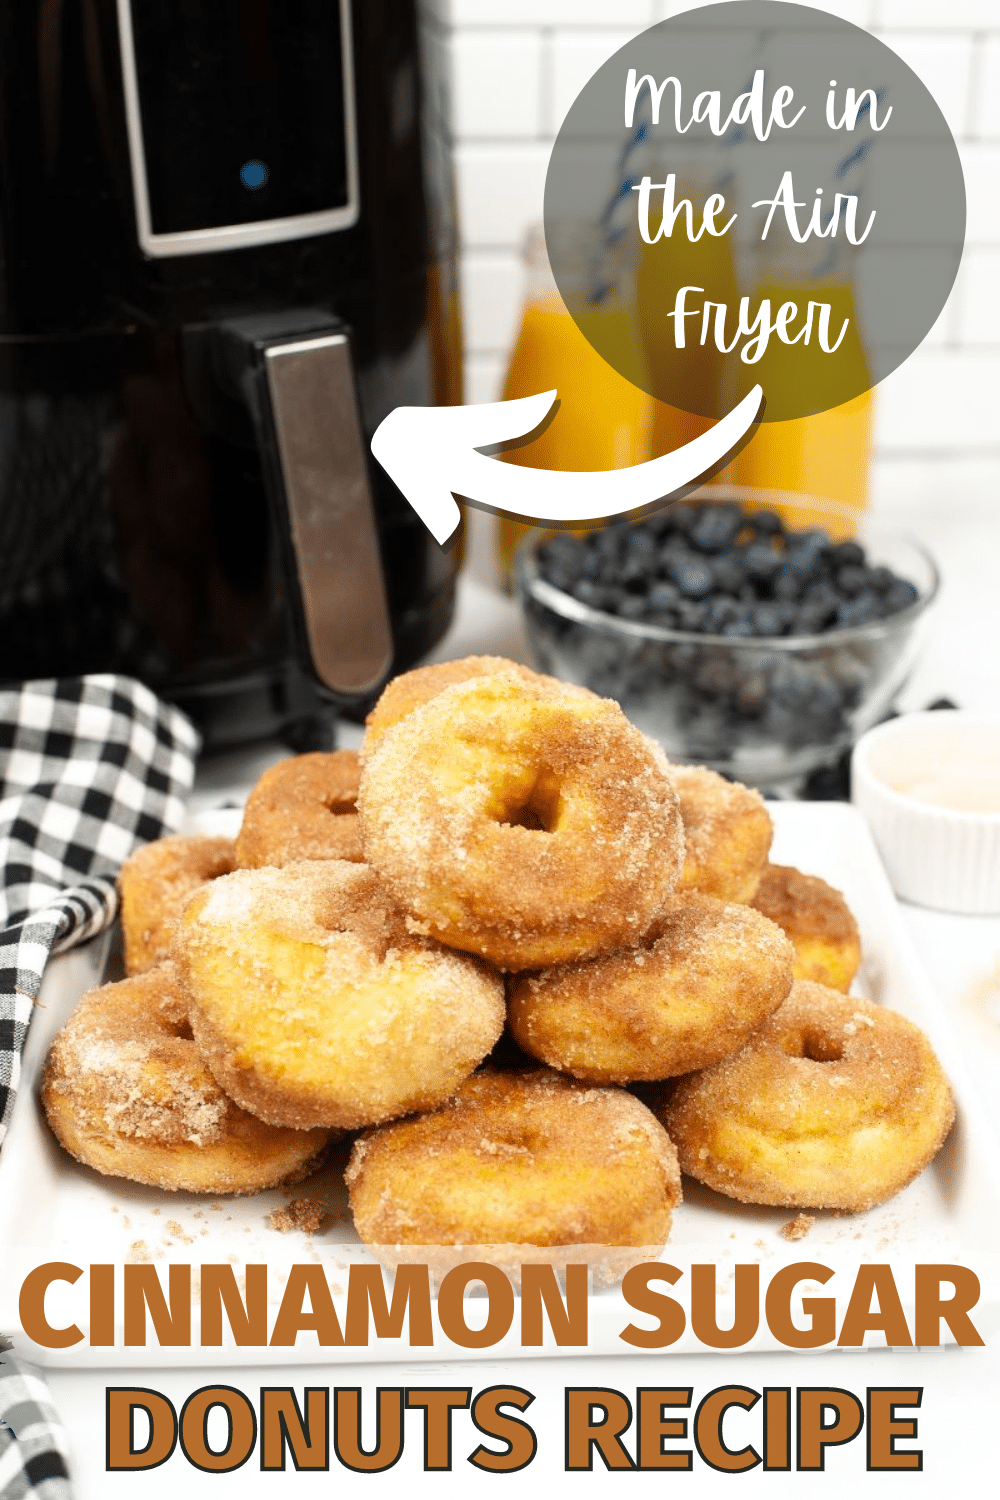 You won't believe how easy it is to make homemade donuts in your air fryer! Just 4 simple ingredients and 15 minutes are all you need. #airfryer #homemadedonuts #recipe via @wondermomwannab